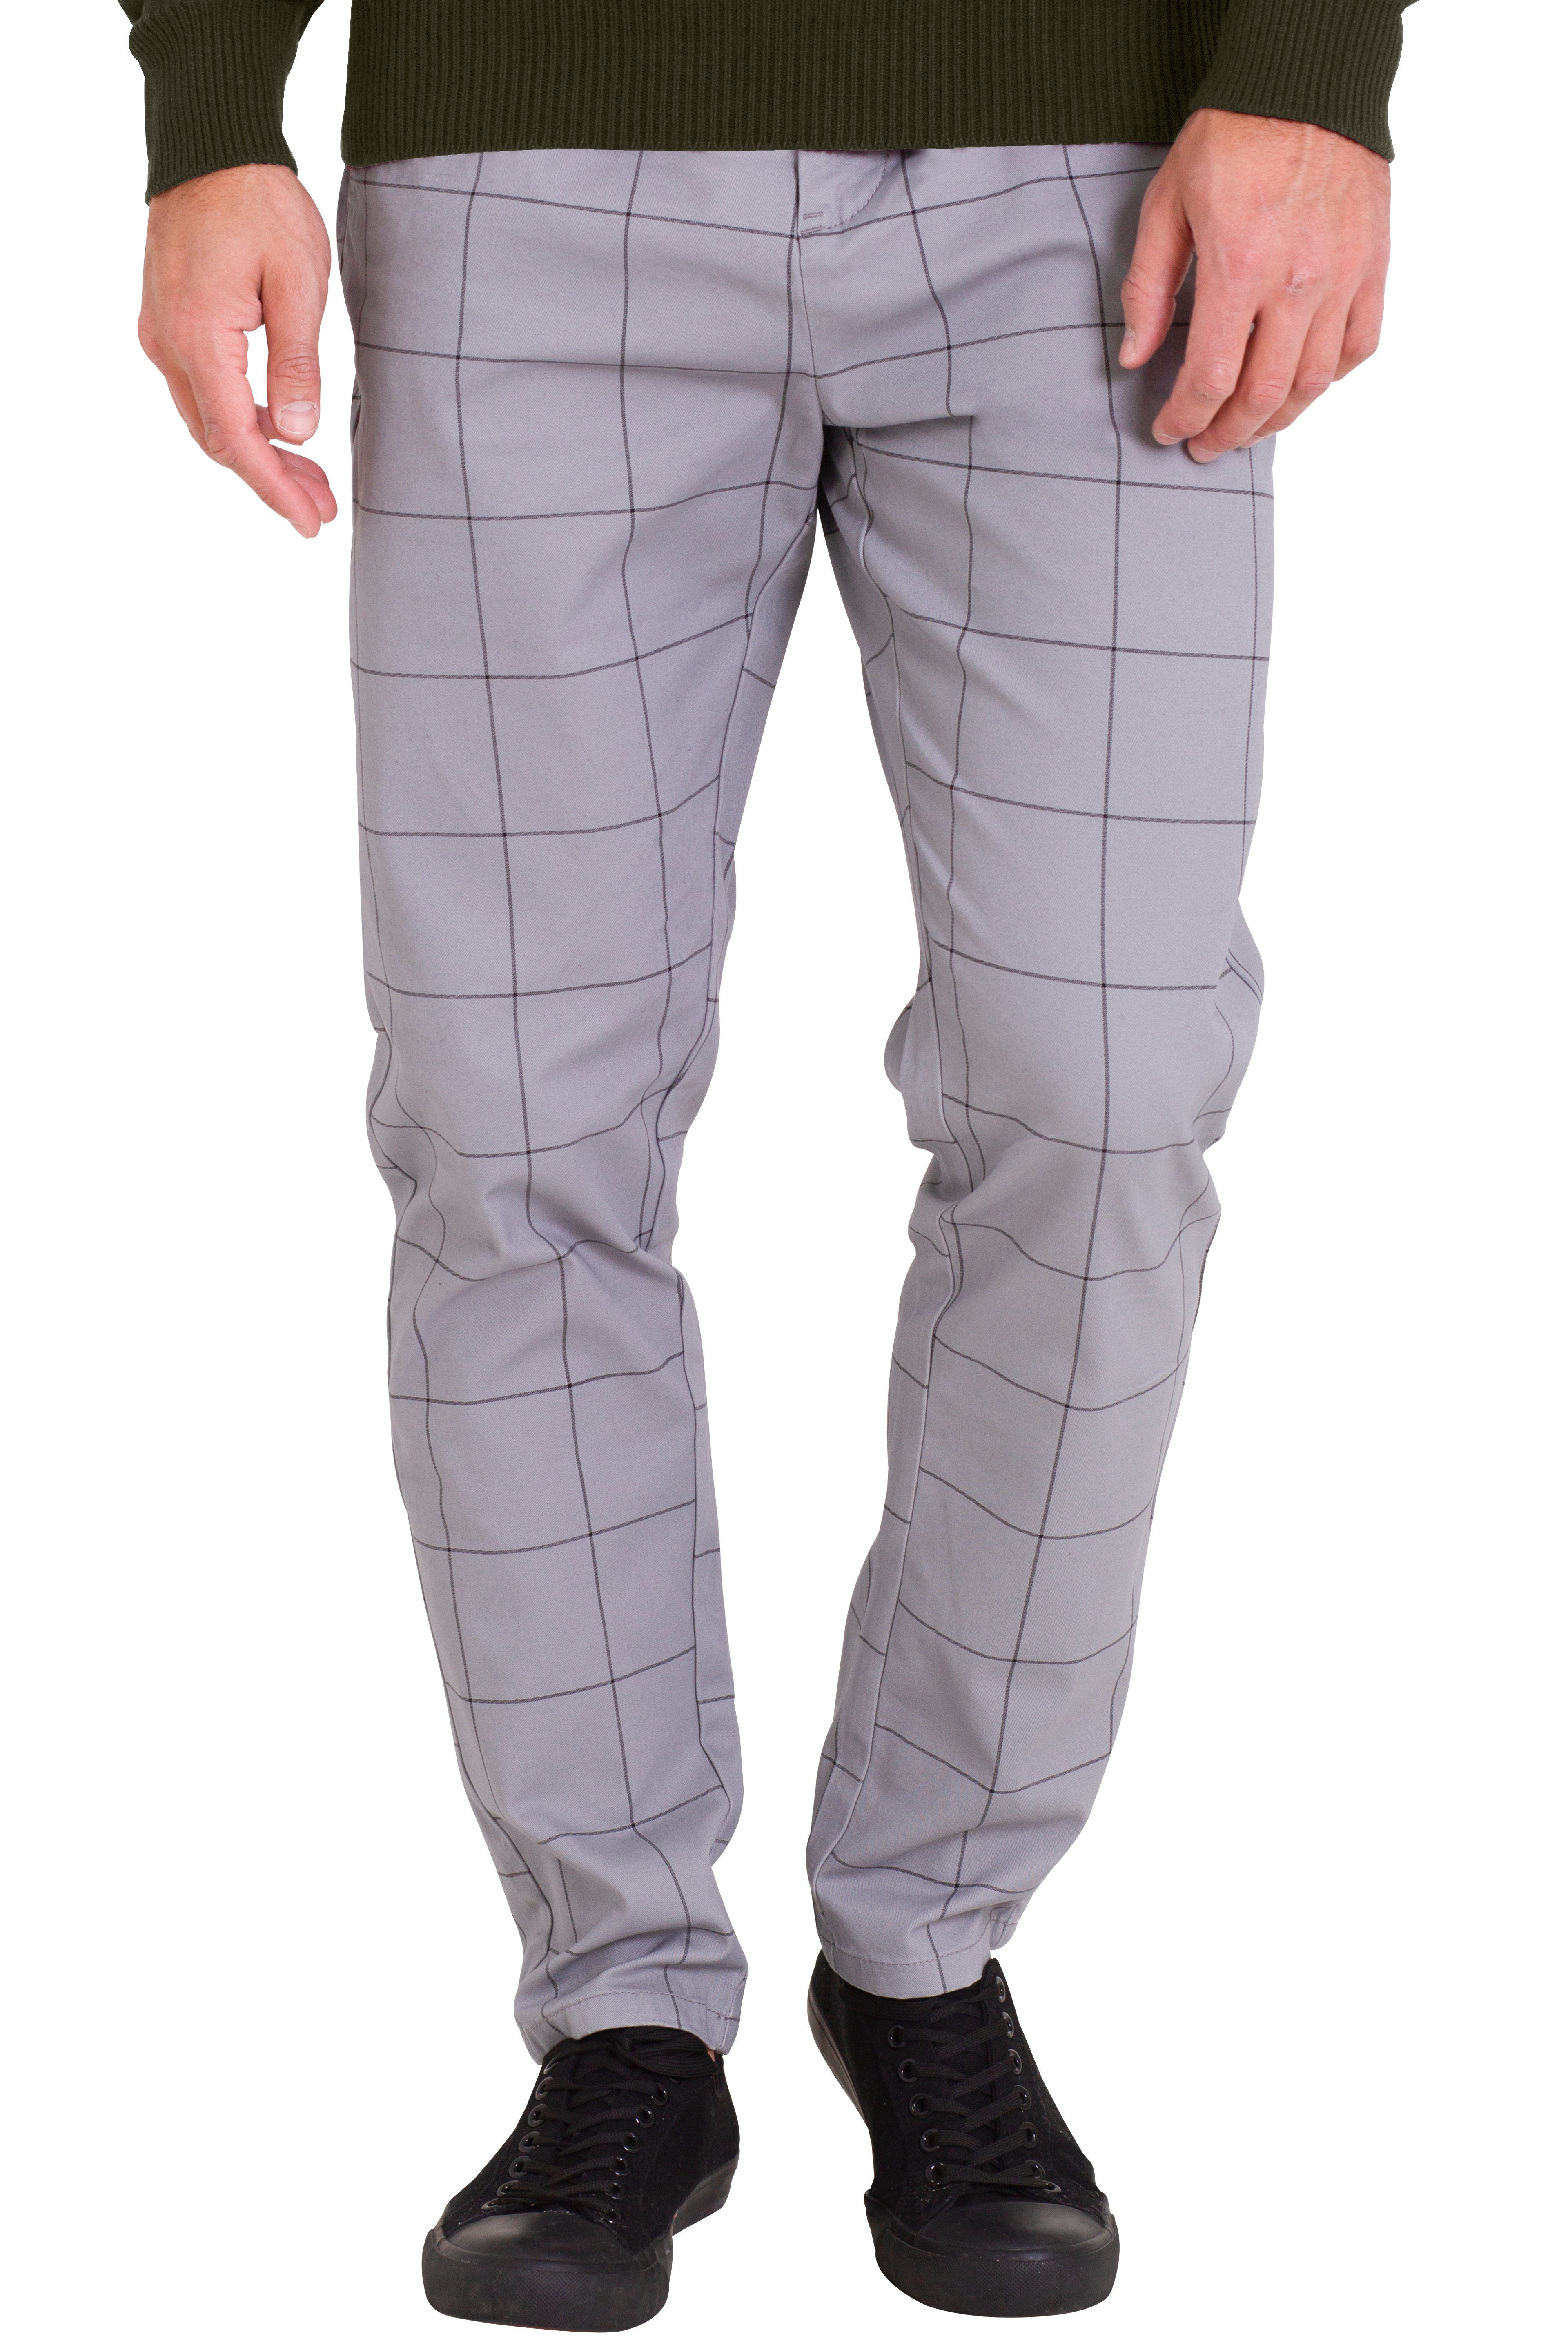 BlauerHafen Chinohose Herren Formaler Check Hose Slim-Fit Vintage Office Business Full Pants 4 Pockets(2 Front 2 Back), All sizes available 30''-38'' Hellgrau